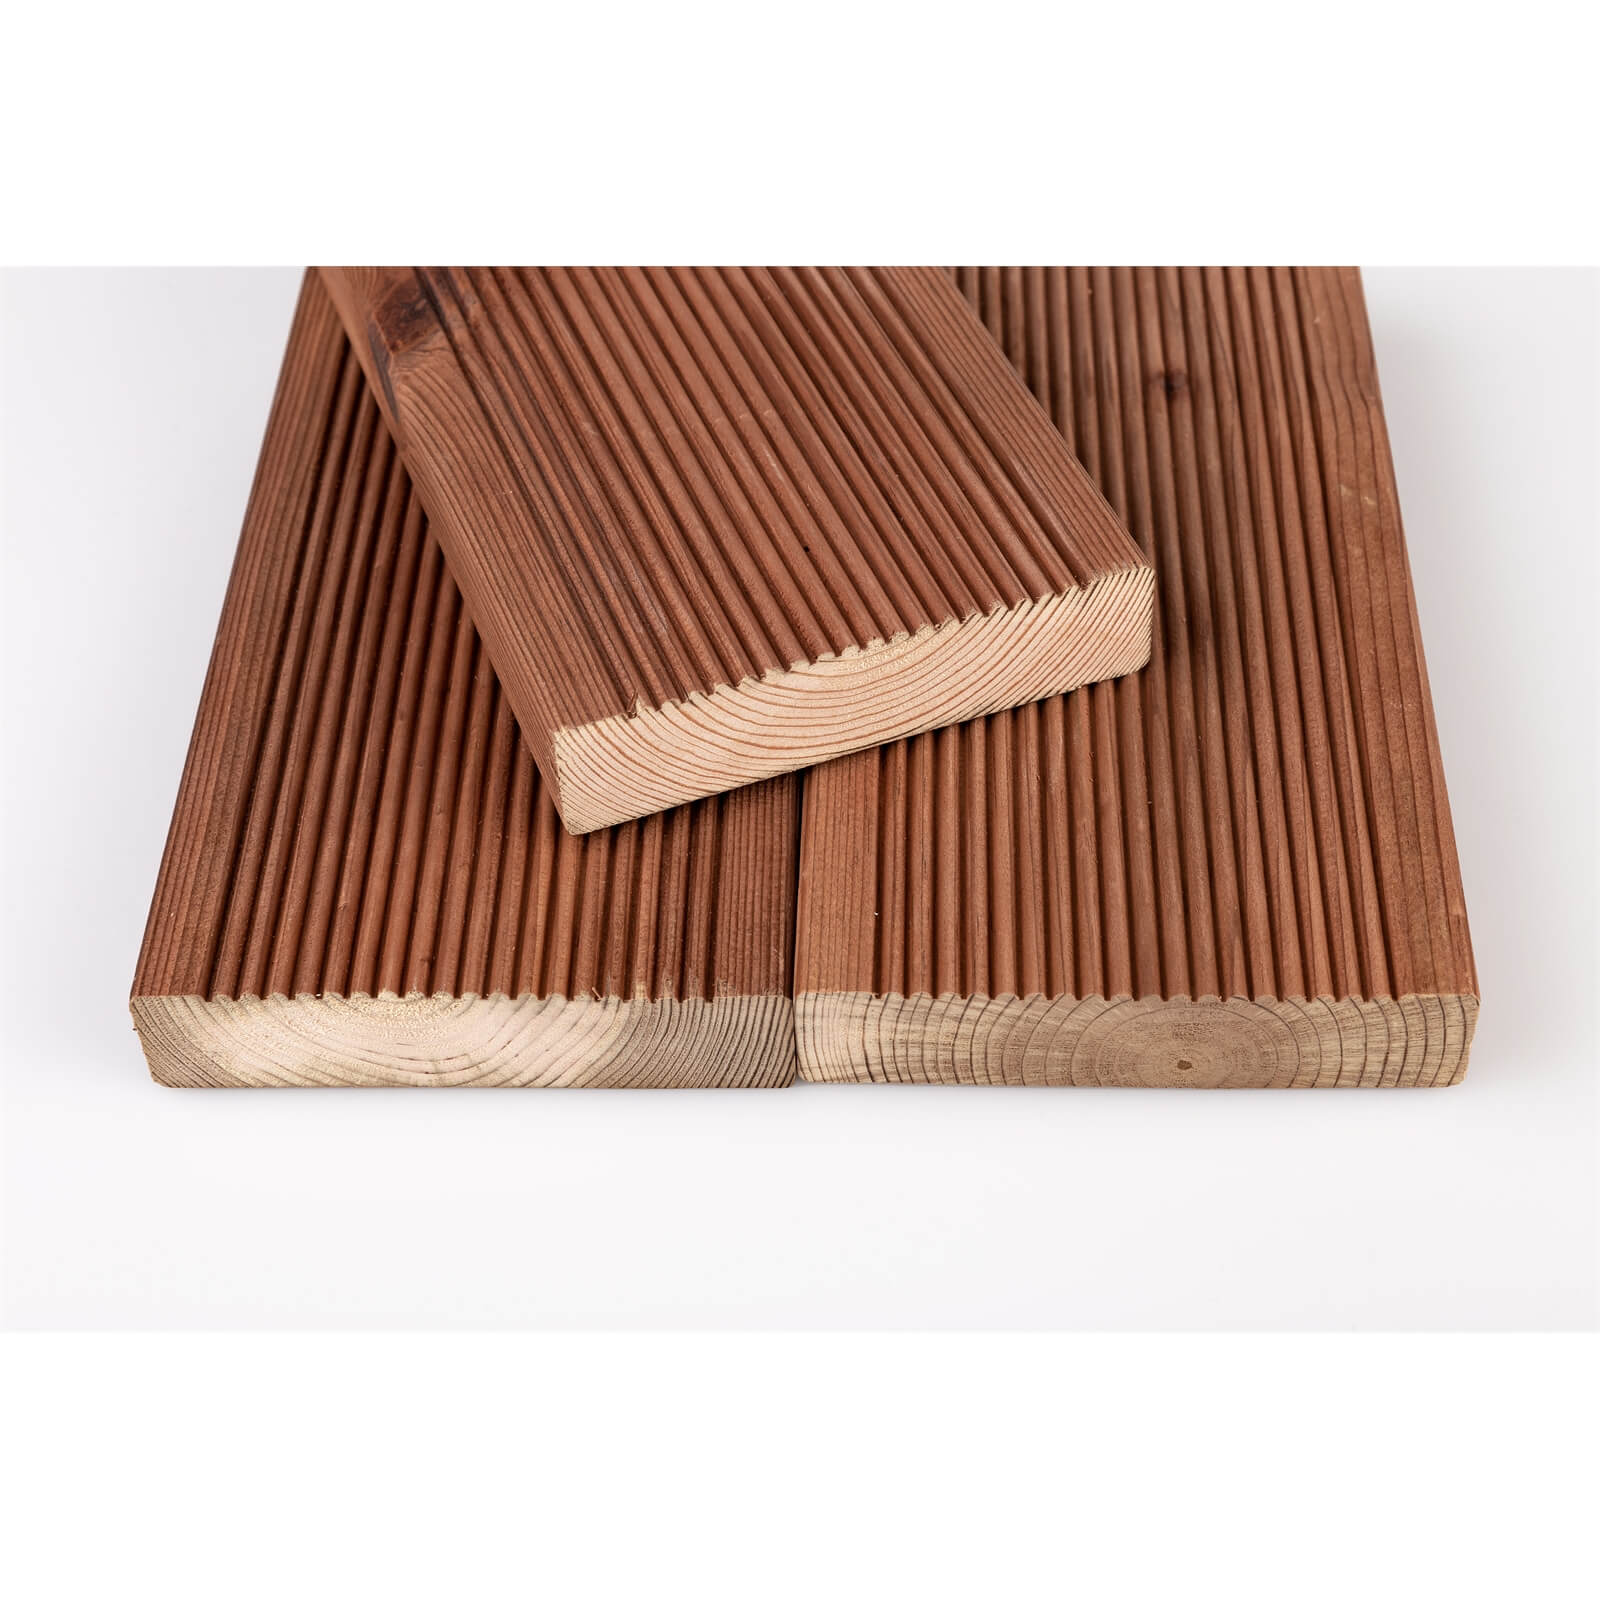 Softwood Timber Brown Decking  28x120x3.0mtr (Pack of 4)